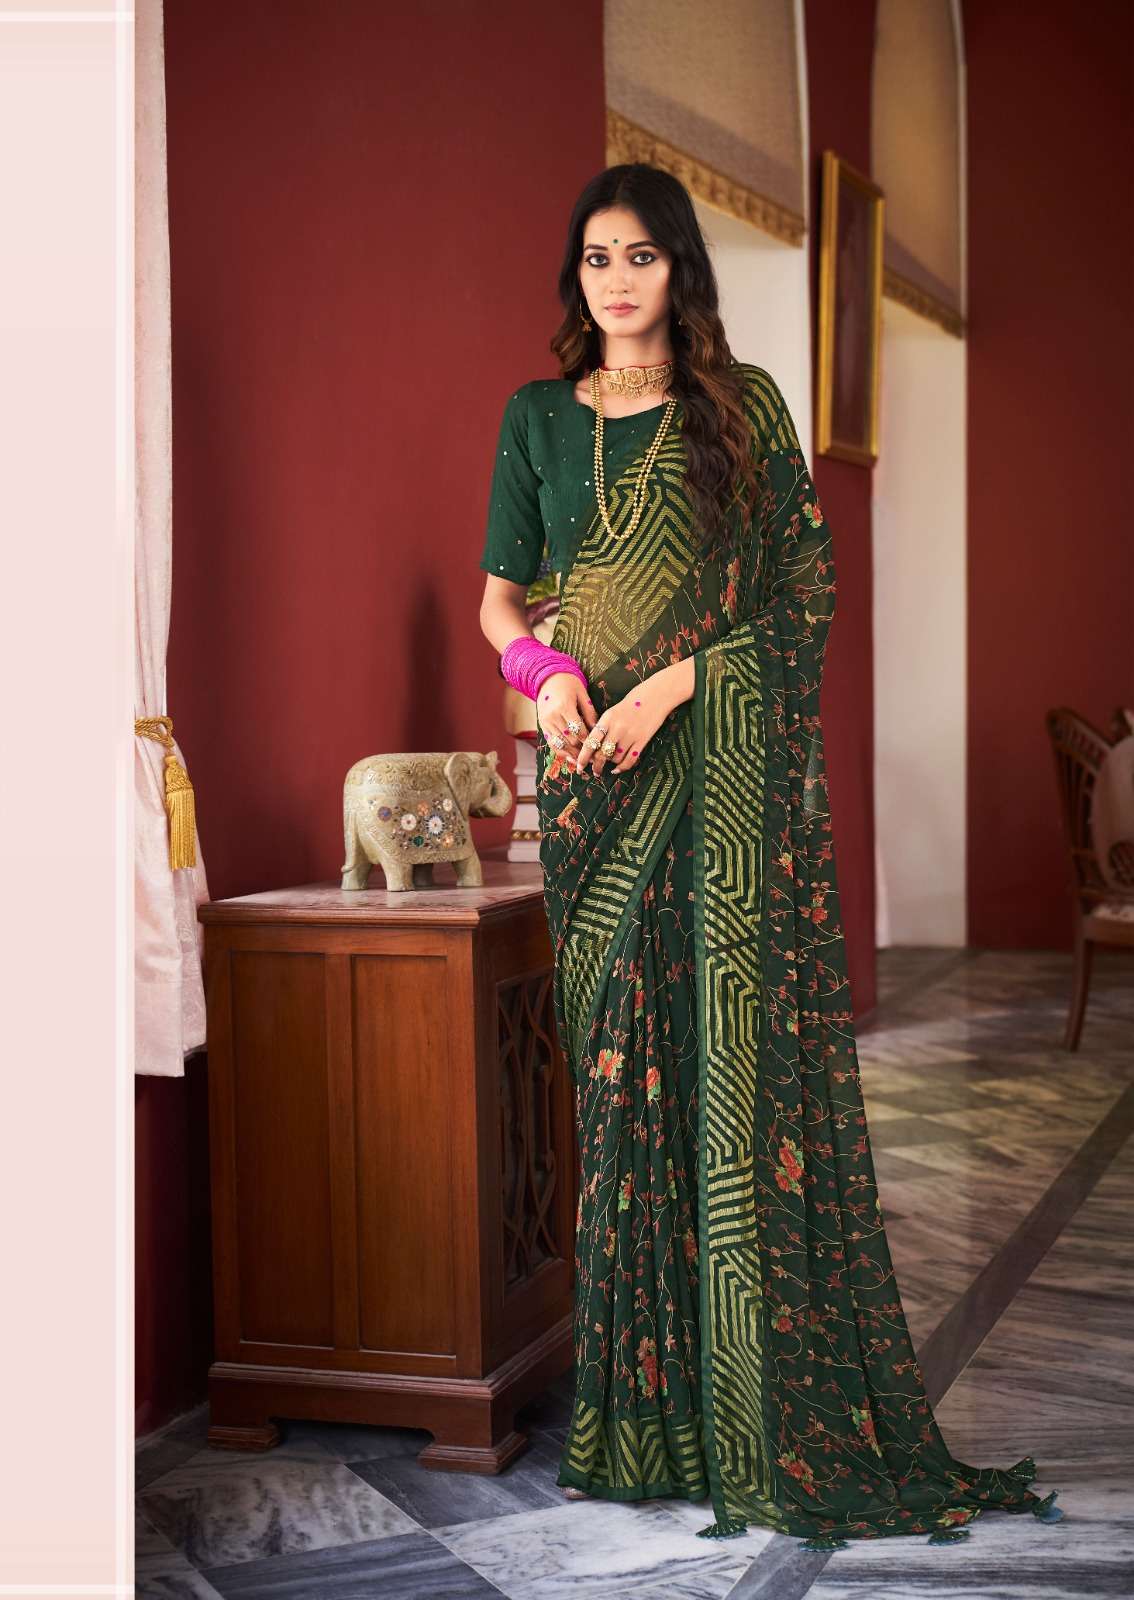 Raaga By Sr 101 To 105 Series Indian Traditional Wear Collection Beautiful Stylish Fancy Colorful Party Wear & Occasional Wear Georgette Sarees At Wholesale Price